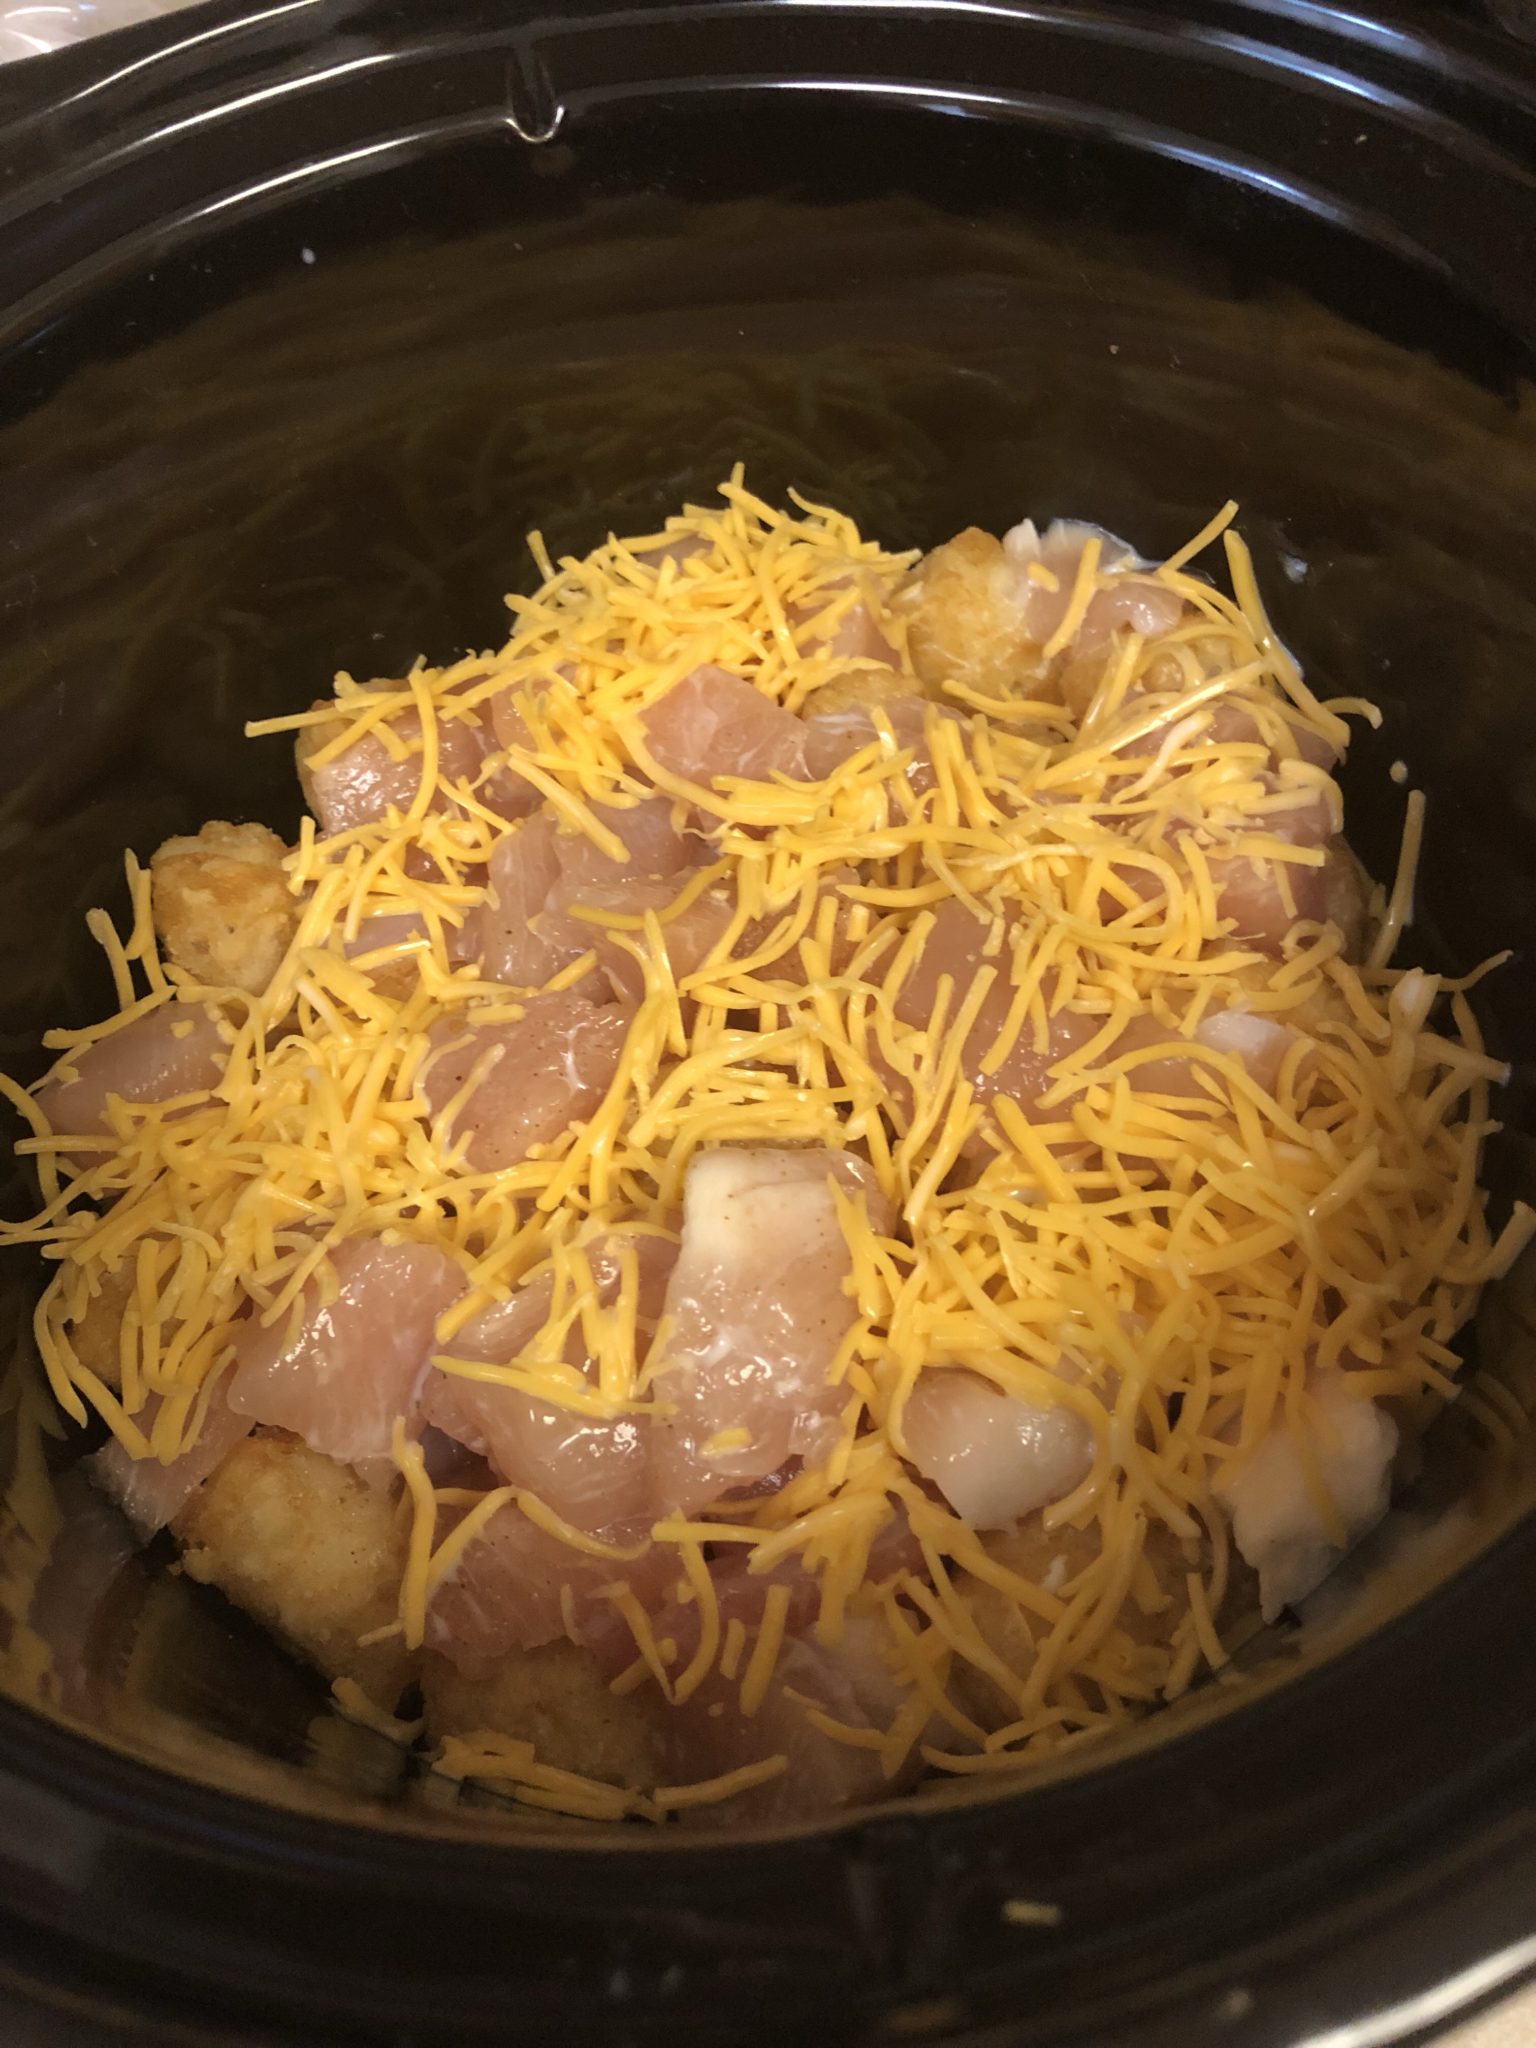 Uncooked casserole in the crockpot